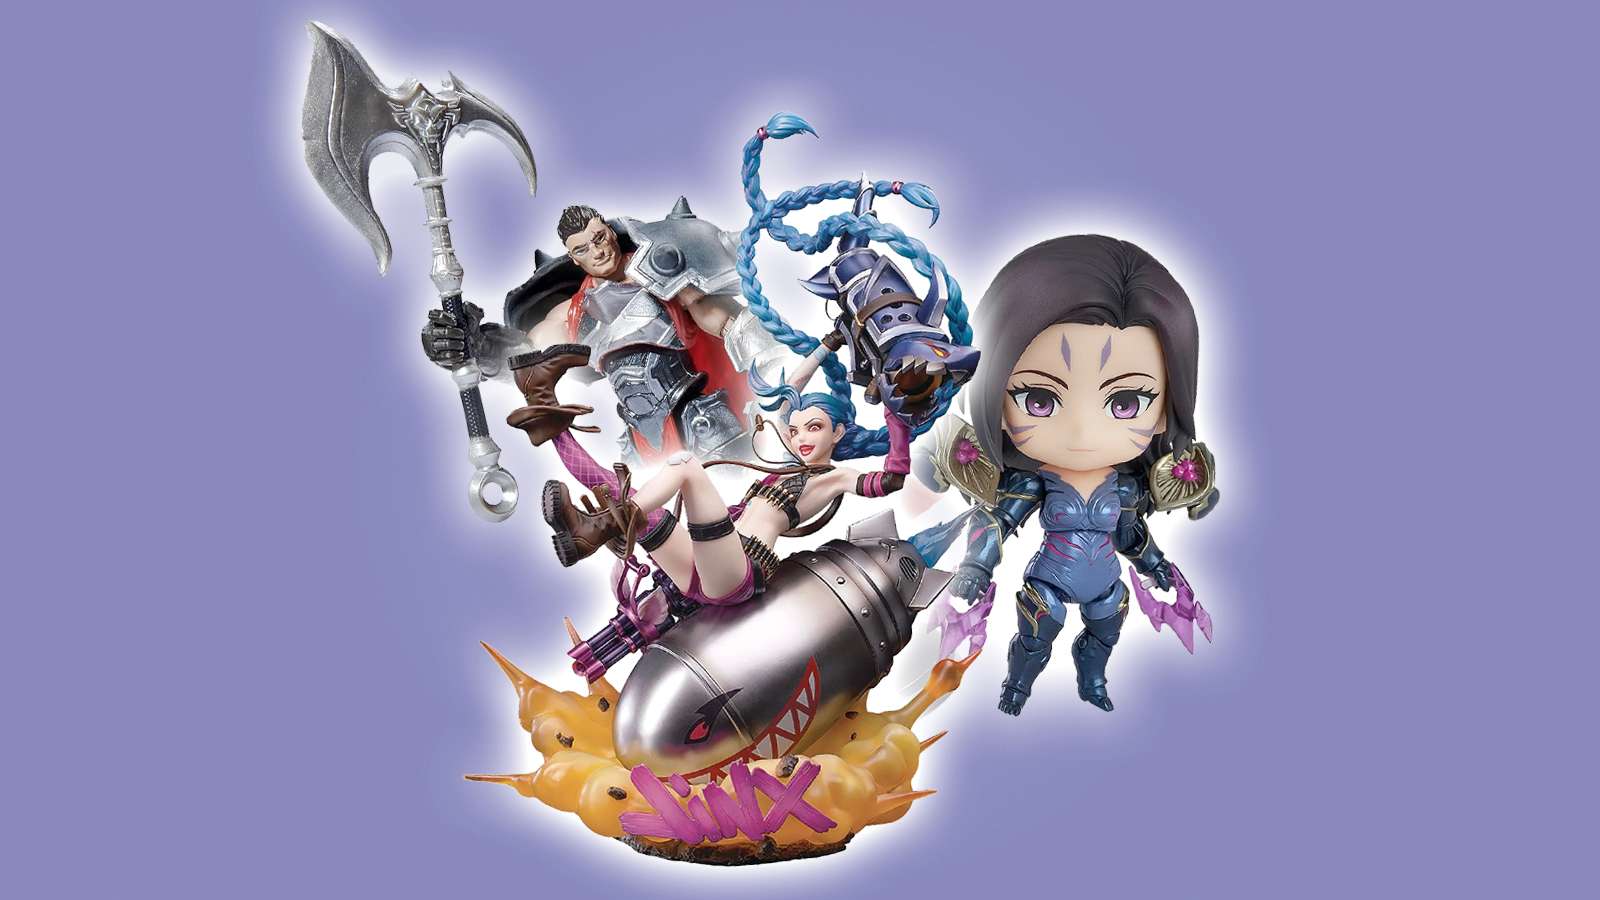 League of Legends characters in figure and statue form